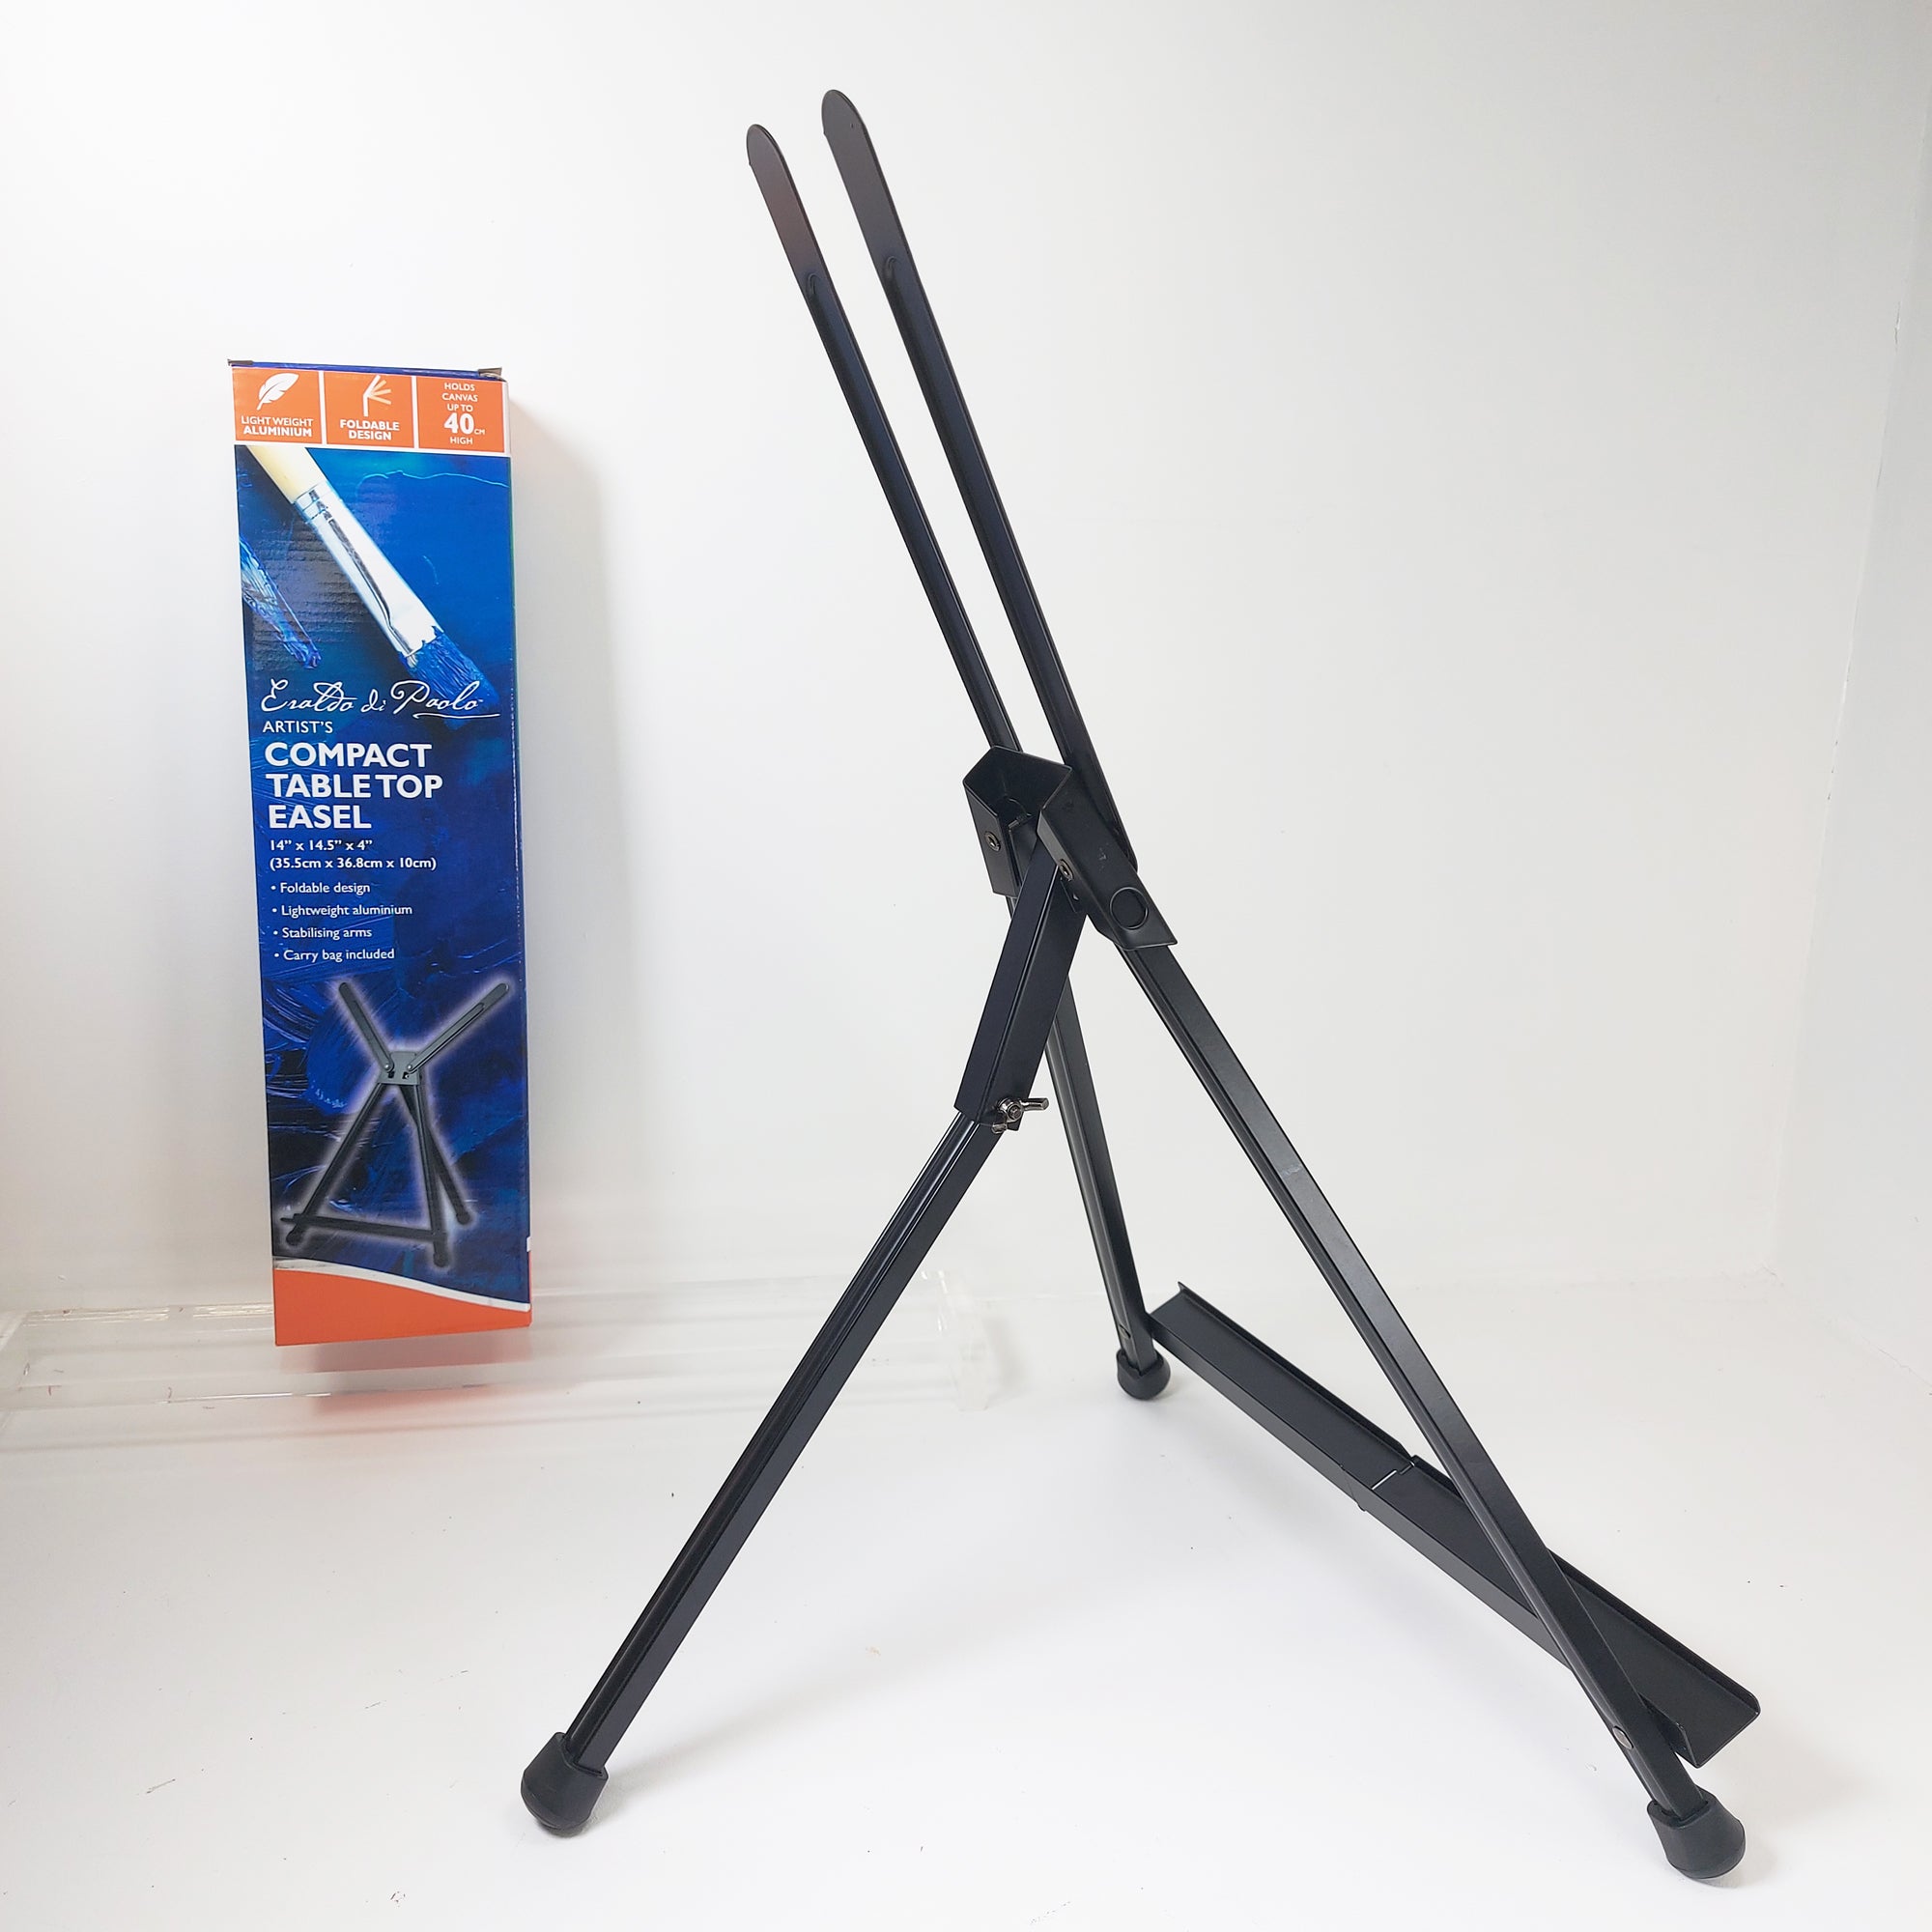 Artist's Compact Table Top Easel with box, showcasing adjustable arms